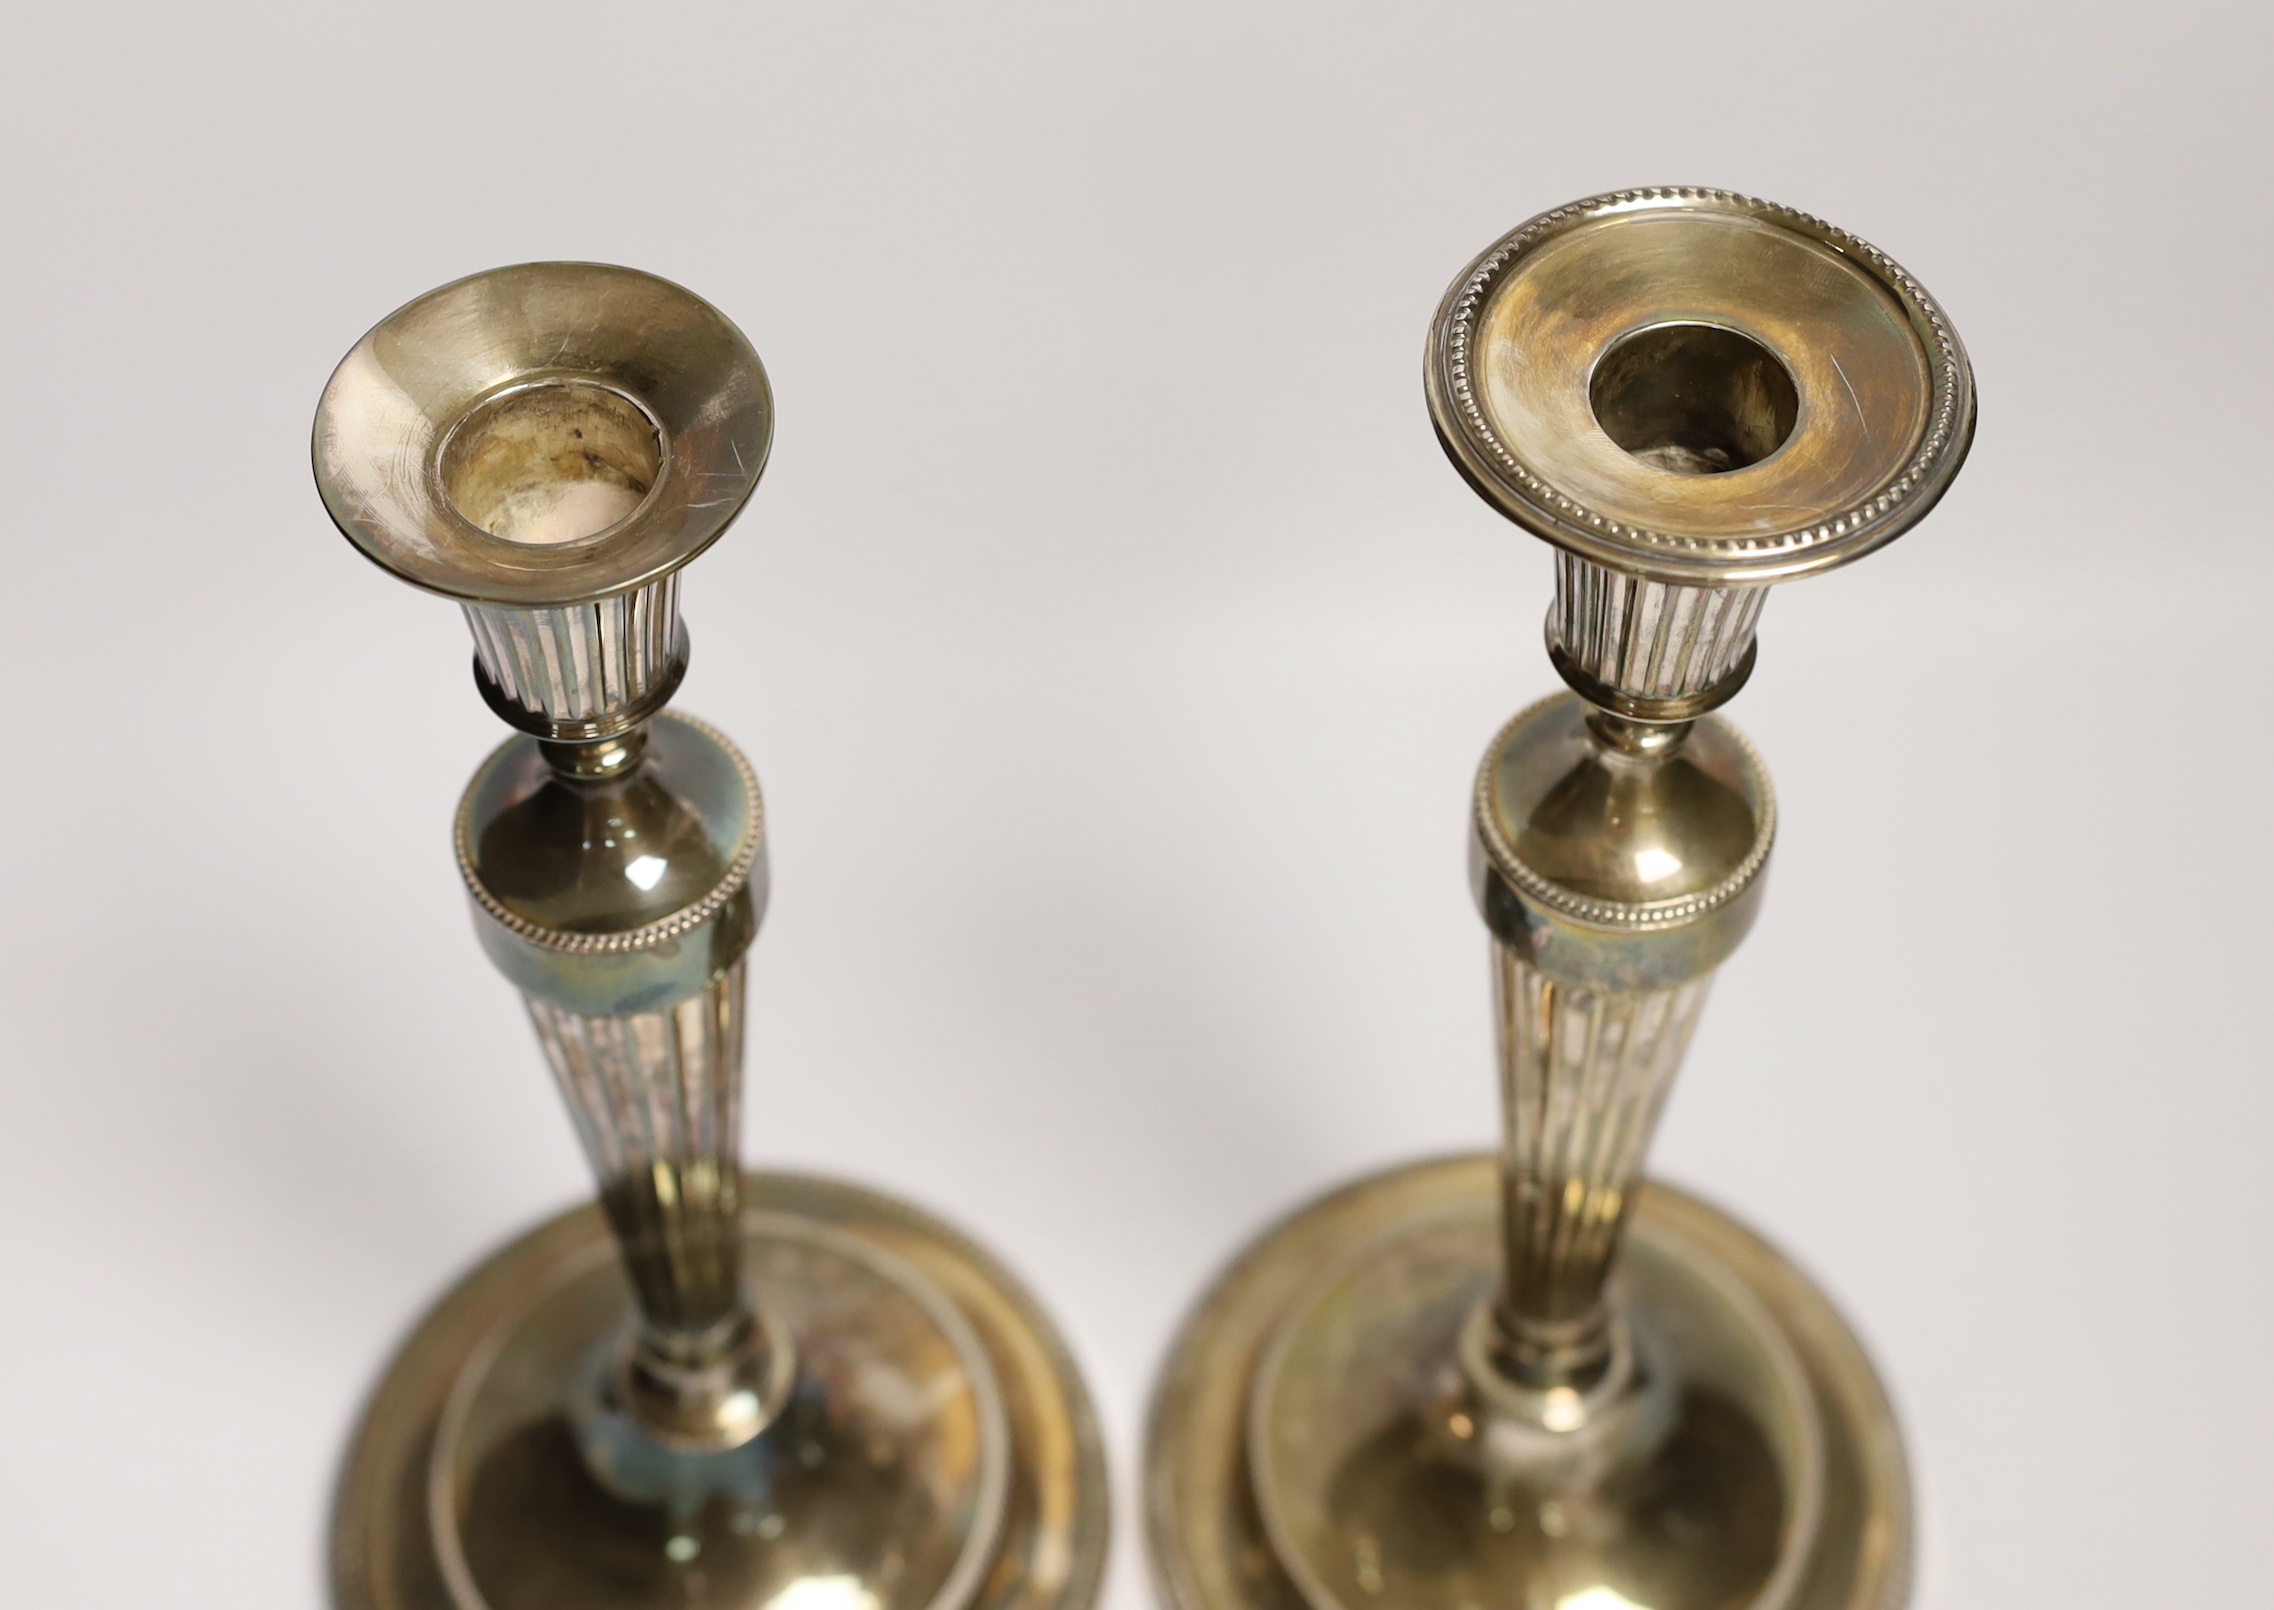 A pair of George III silver candlesticks, with waisted fluted stems, John Winter & Co, Sheffield, date letter rubbed, circa 1780, height 30cm, weighted, lacking one sconce.